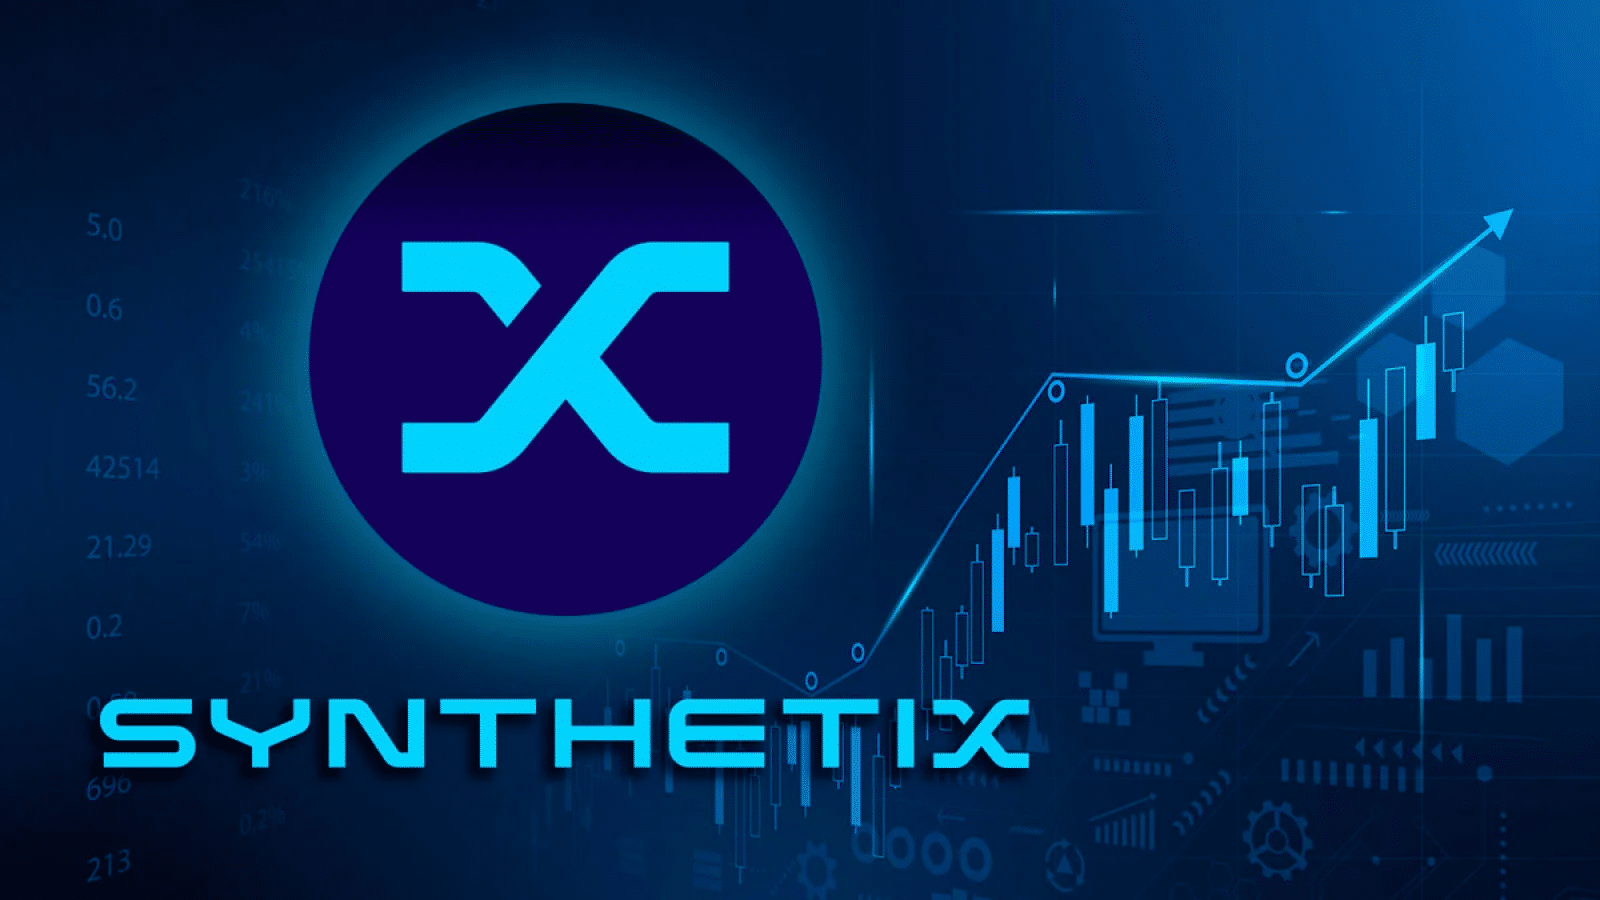 Next Cryptocurrency To Explode Sunday, March 17 – Aave, Synthetix, Conflux